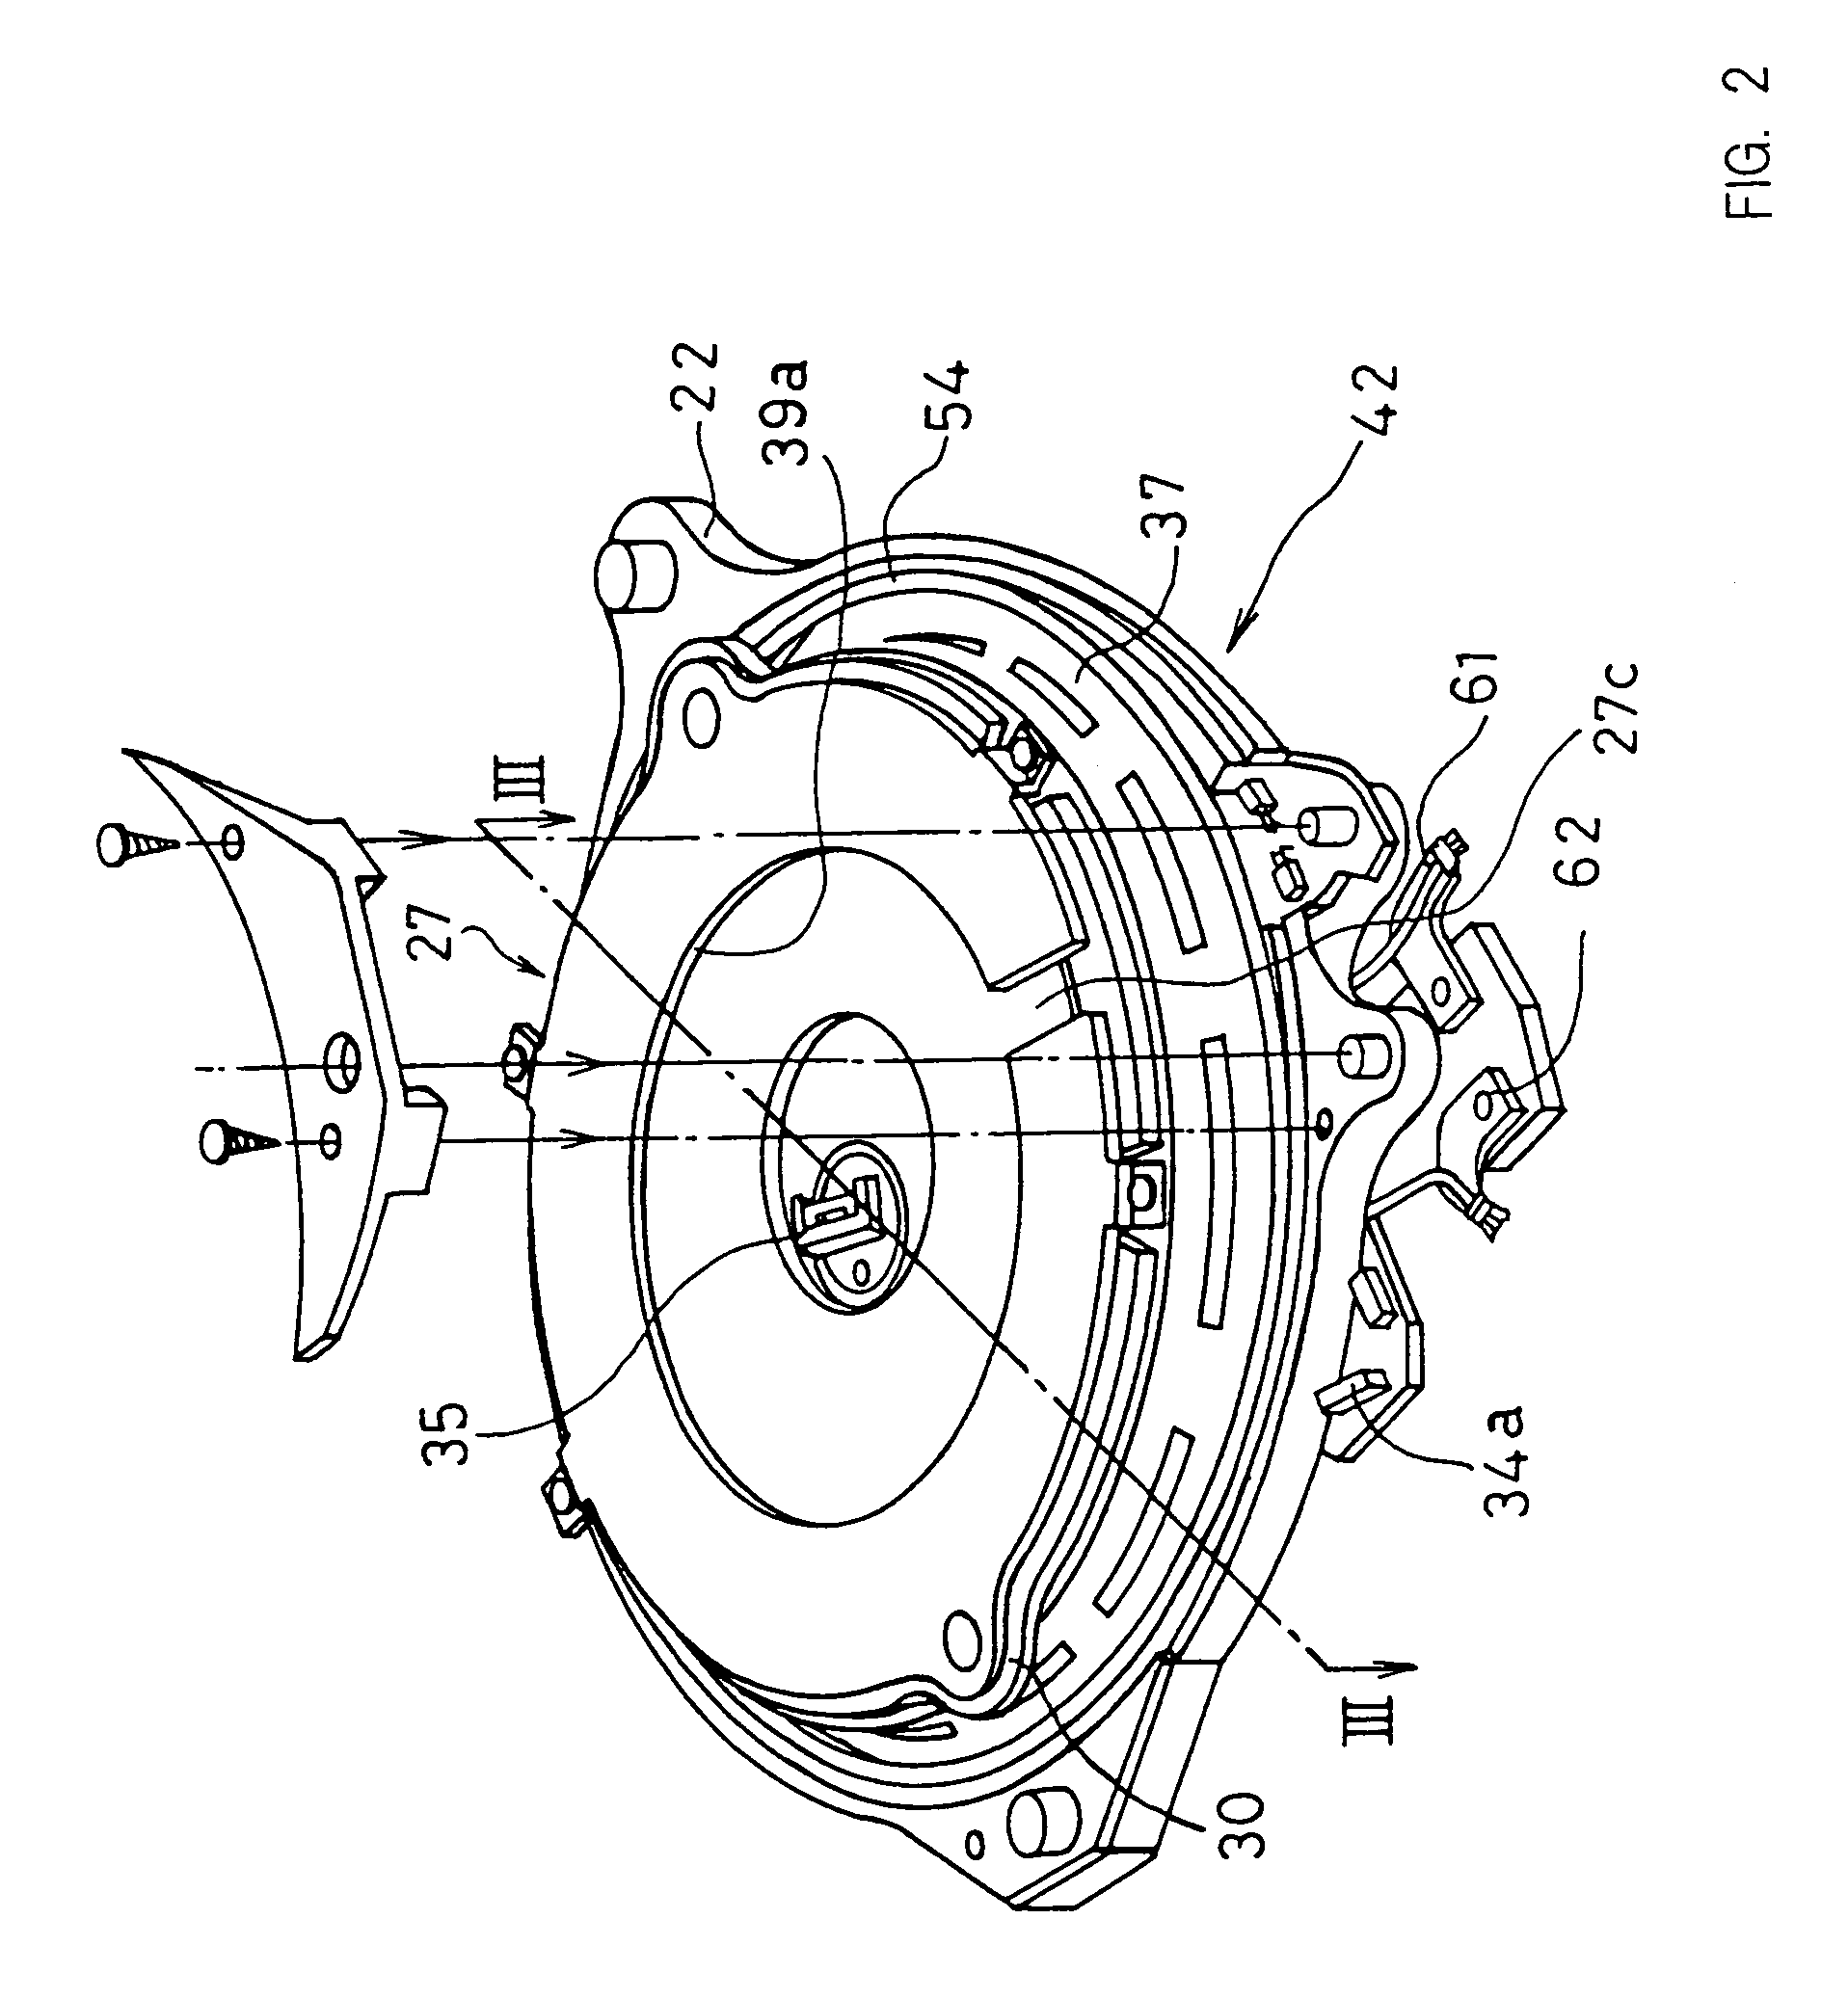 Induction heating device